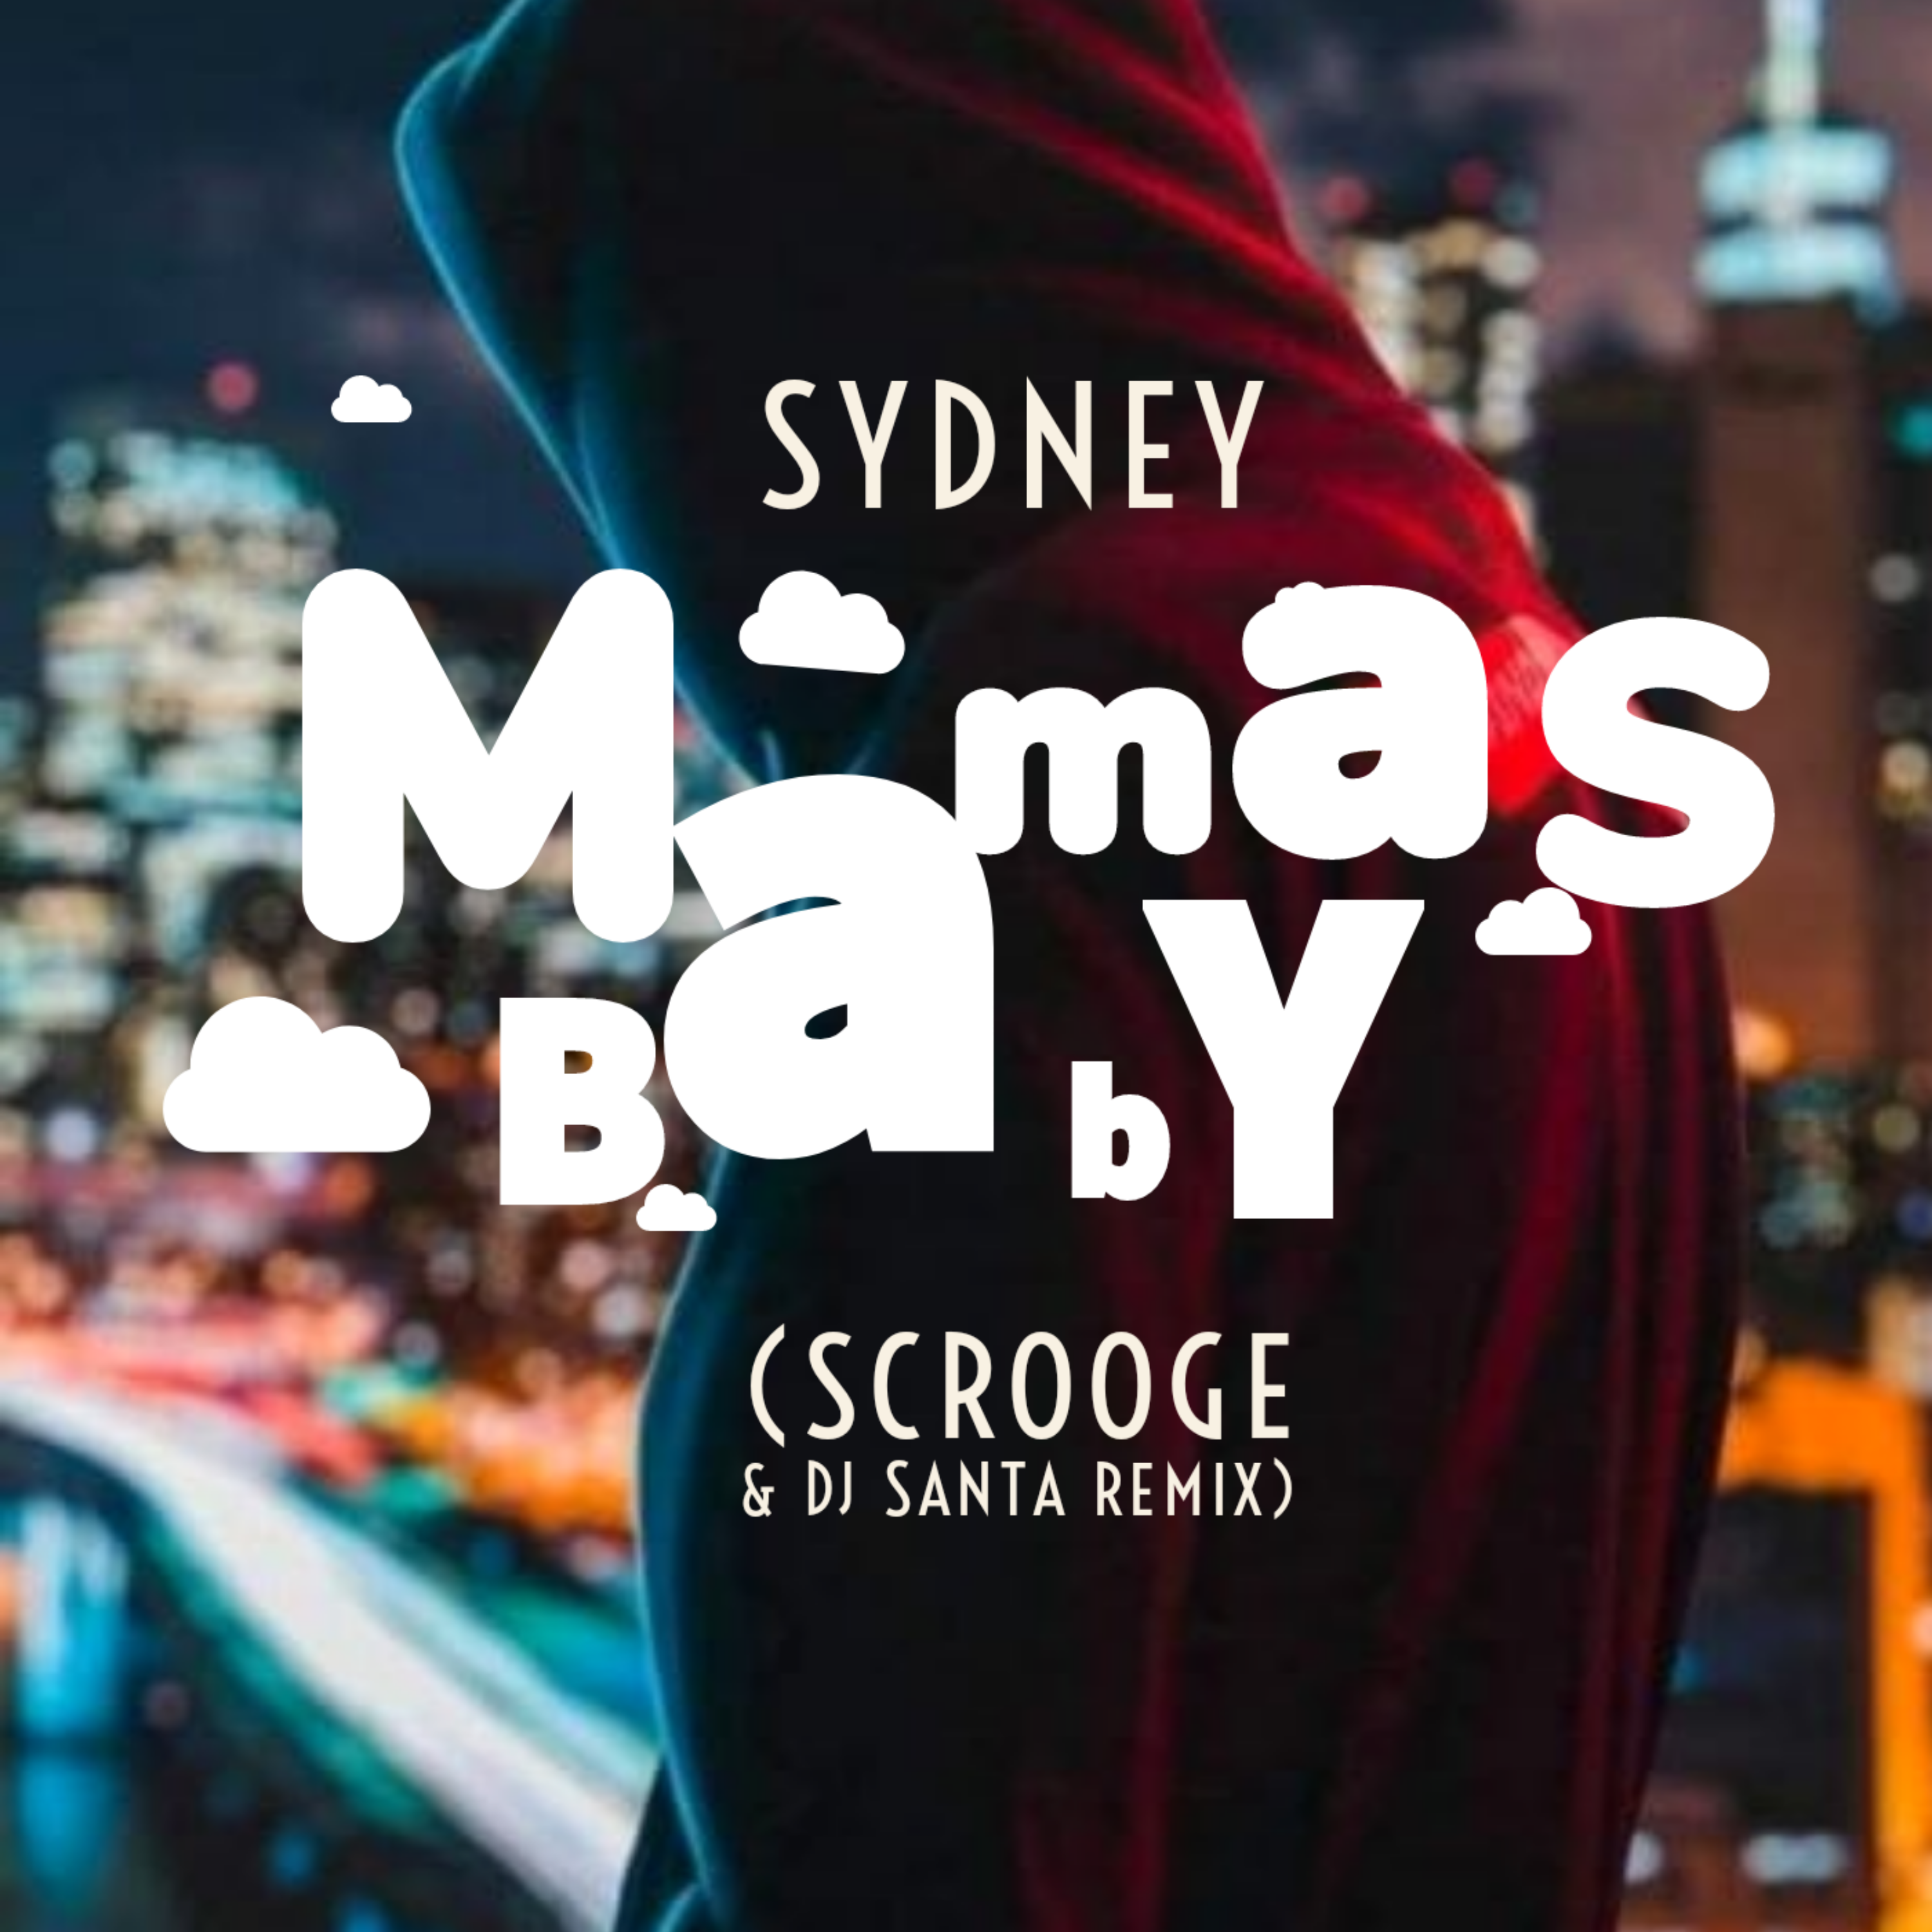 SCROOGE KMAO AND DJ SANTA REMIX THE FAMOUS SYDNEY HIT ‘MAMA’S BABY’ – TUNE IN TO HEAR THIS CLASSIC, REMIXED.